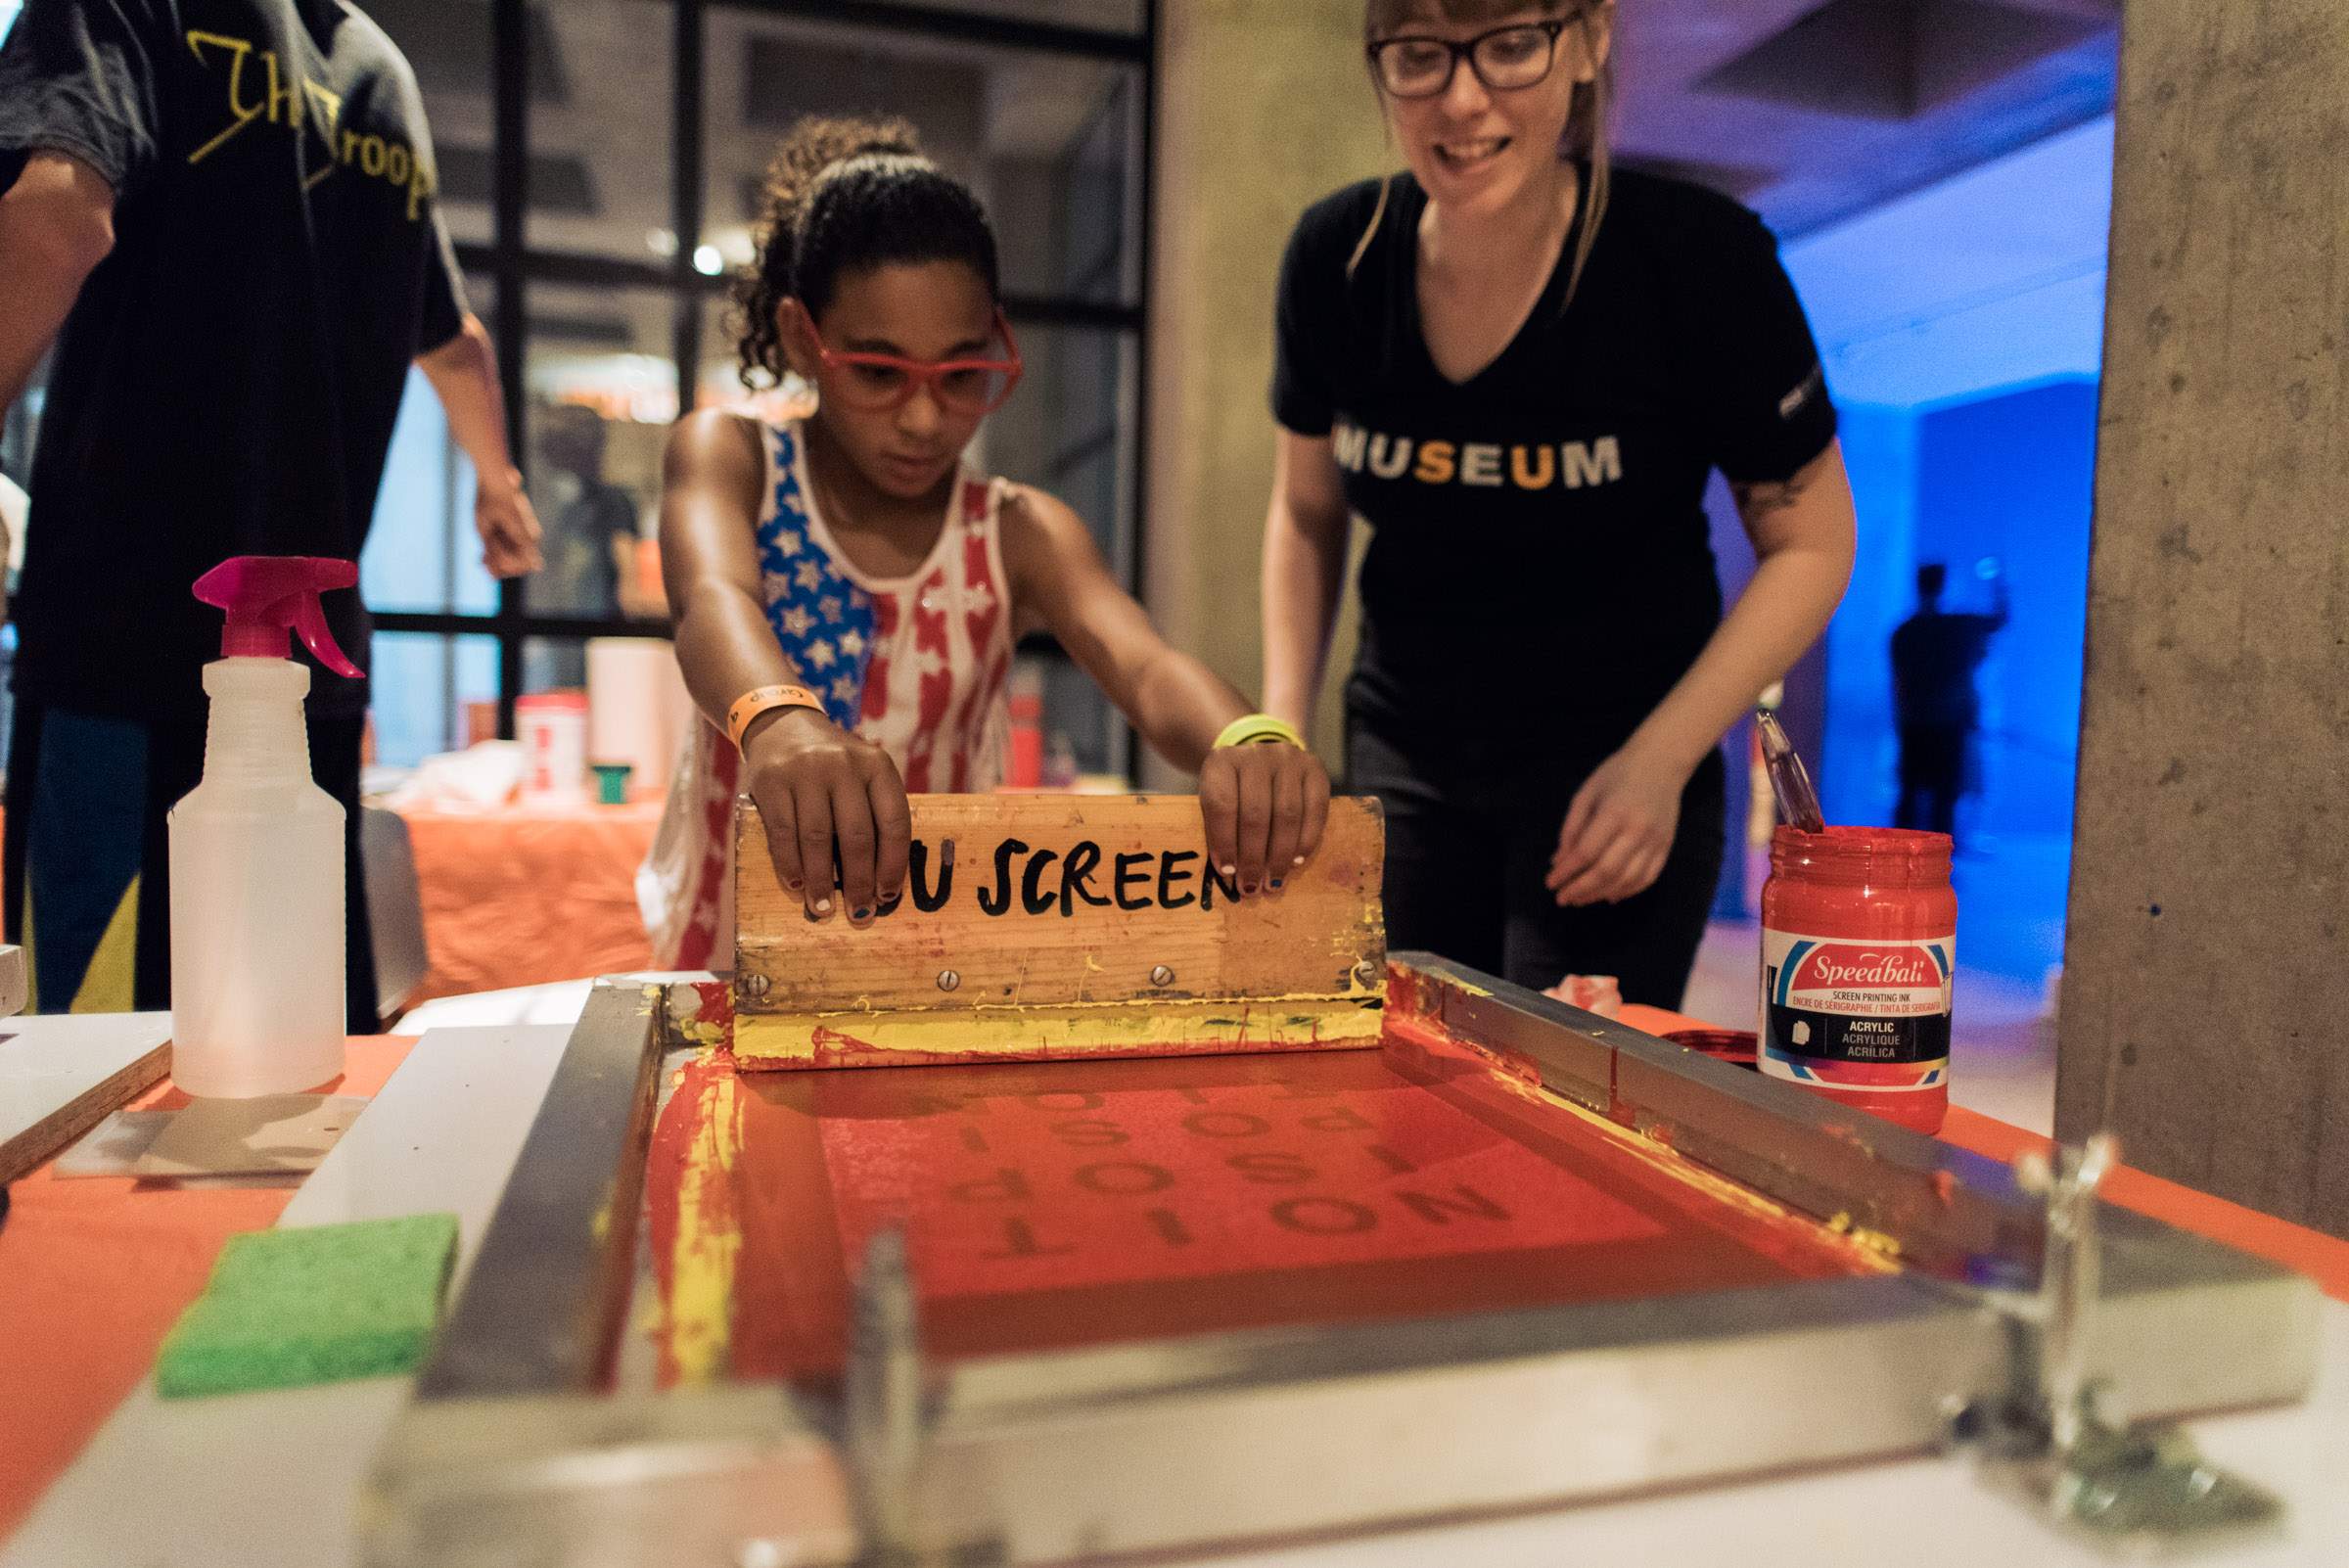 Image shows a young girl learning how to make a screenprint under the guidance of an ASU student